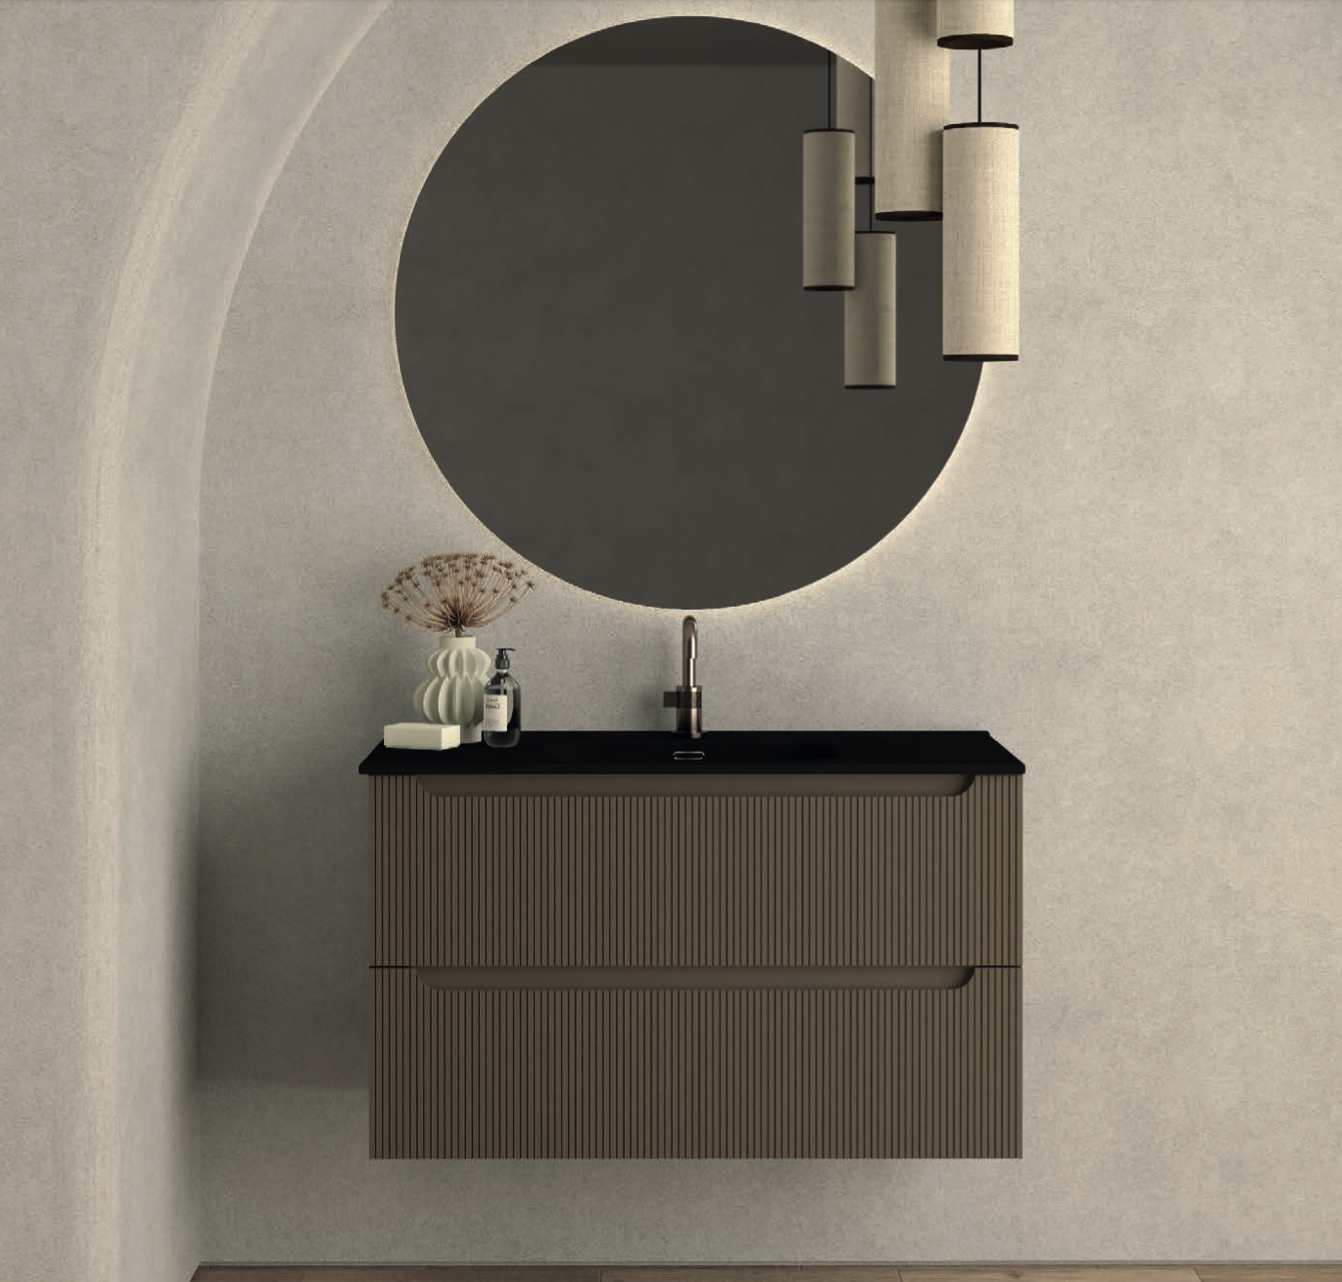 Ceramic countertop with integrated black Planet sink for Atelier wooden bathroom furniture